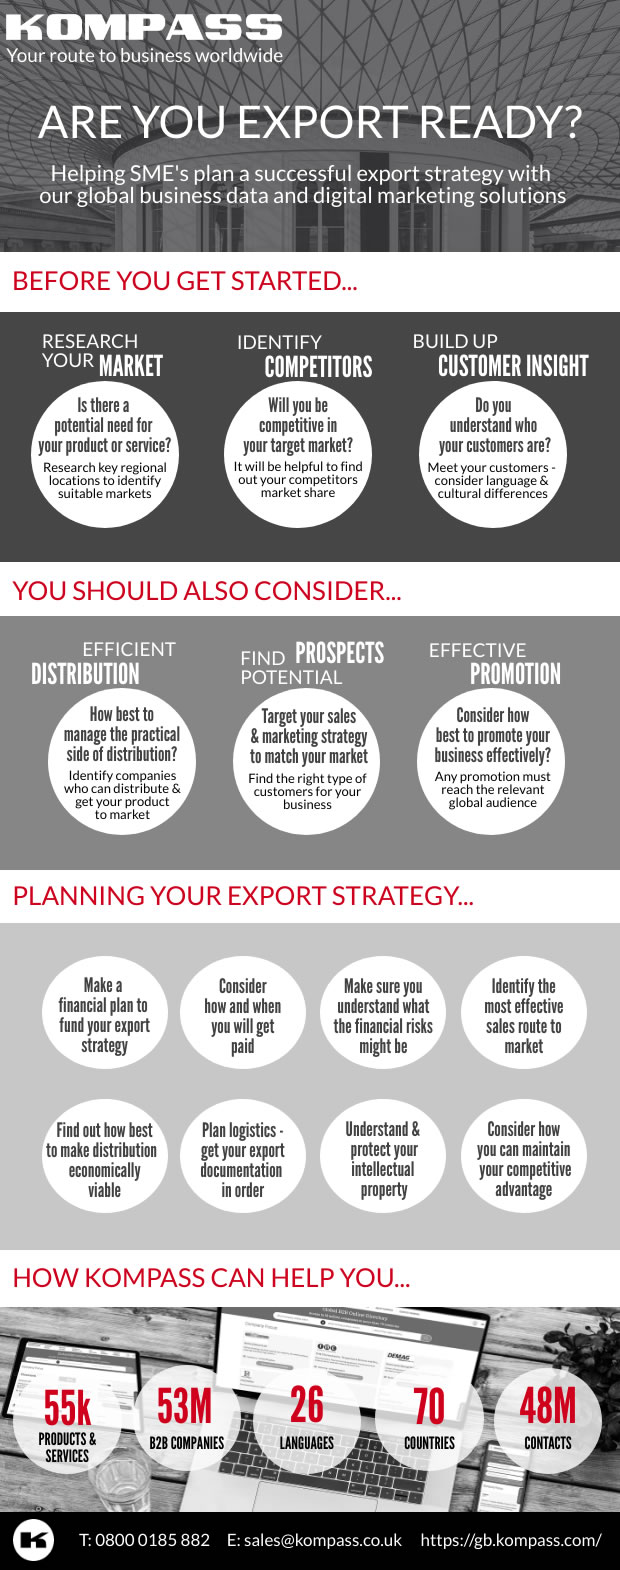 Are You Export Ready?